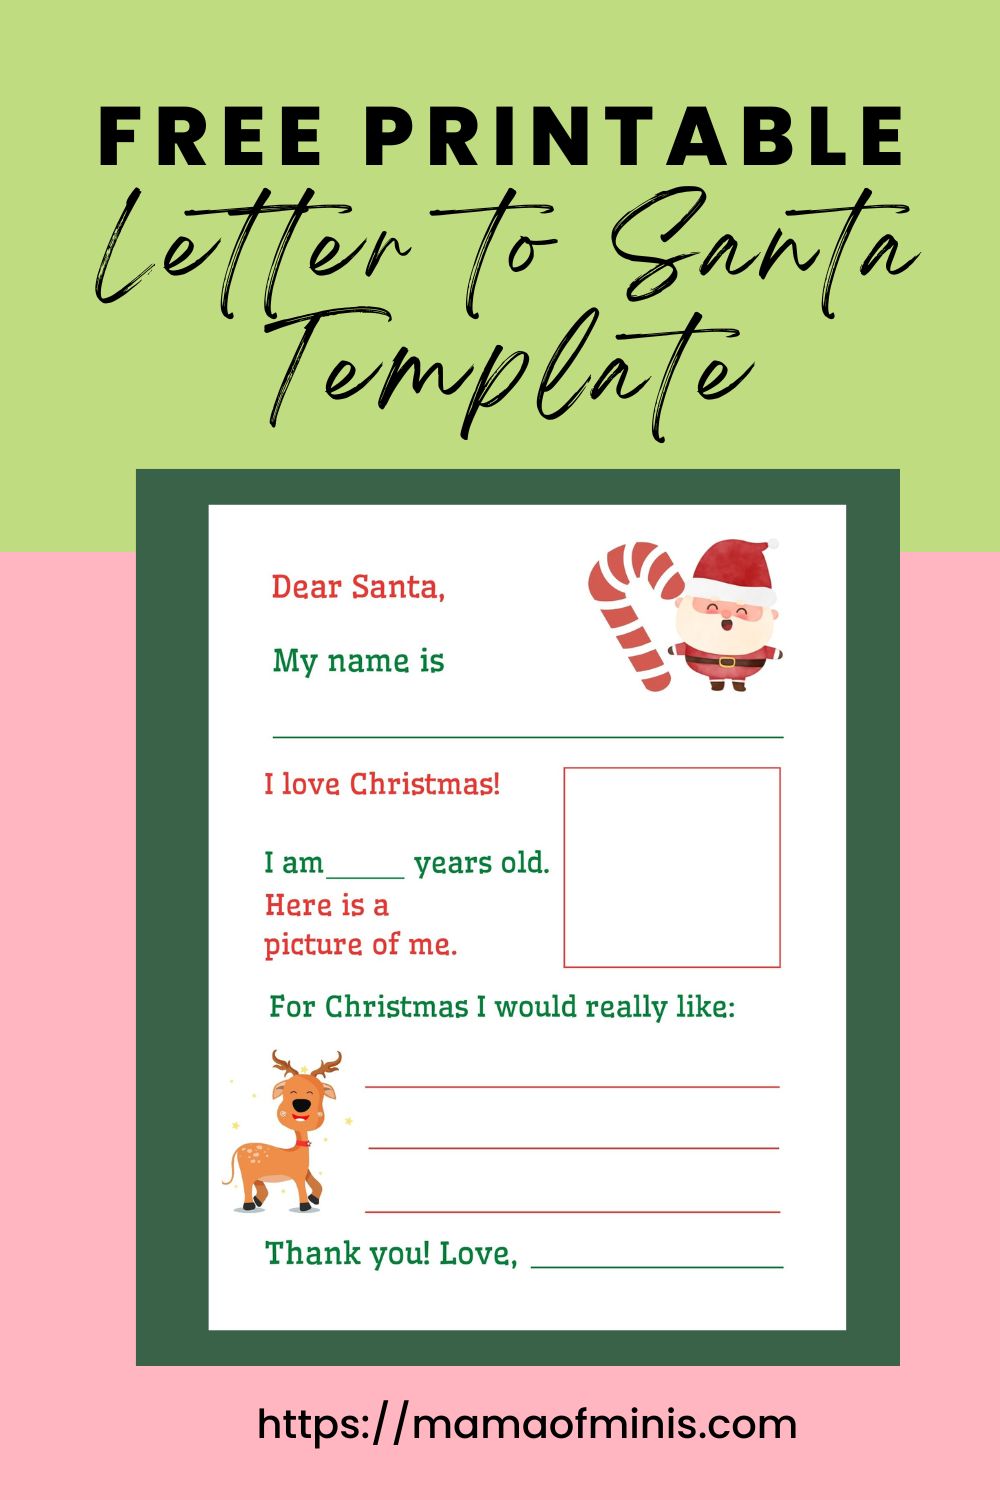 Free Printable Letter to Santa Template